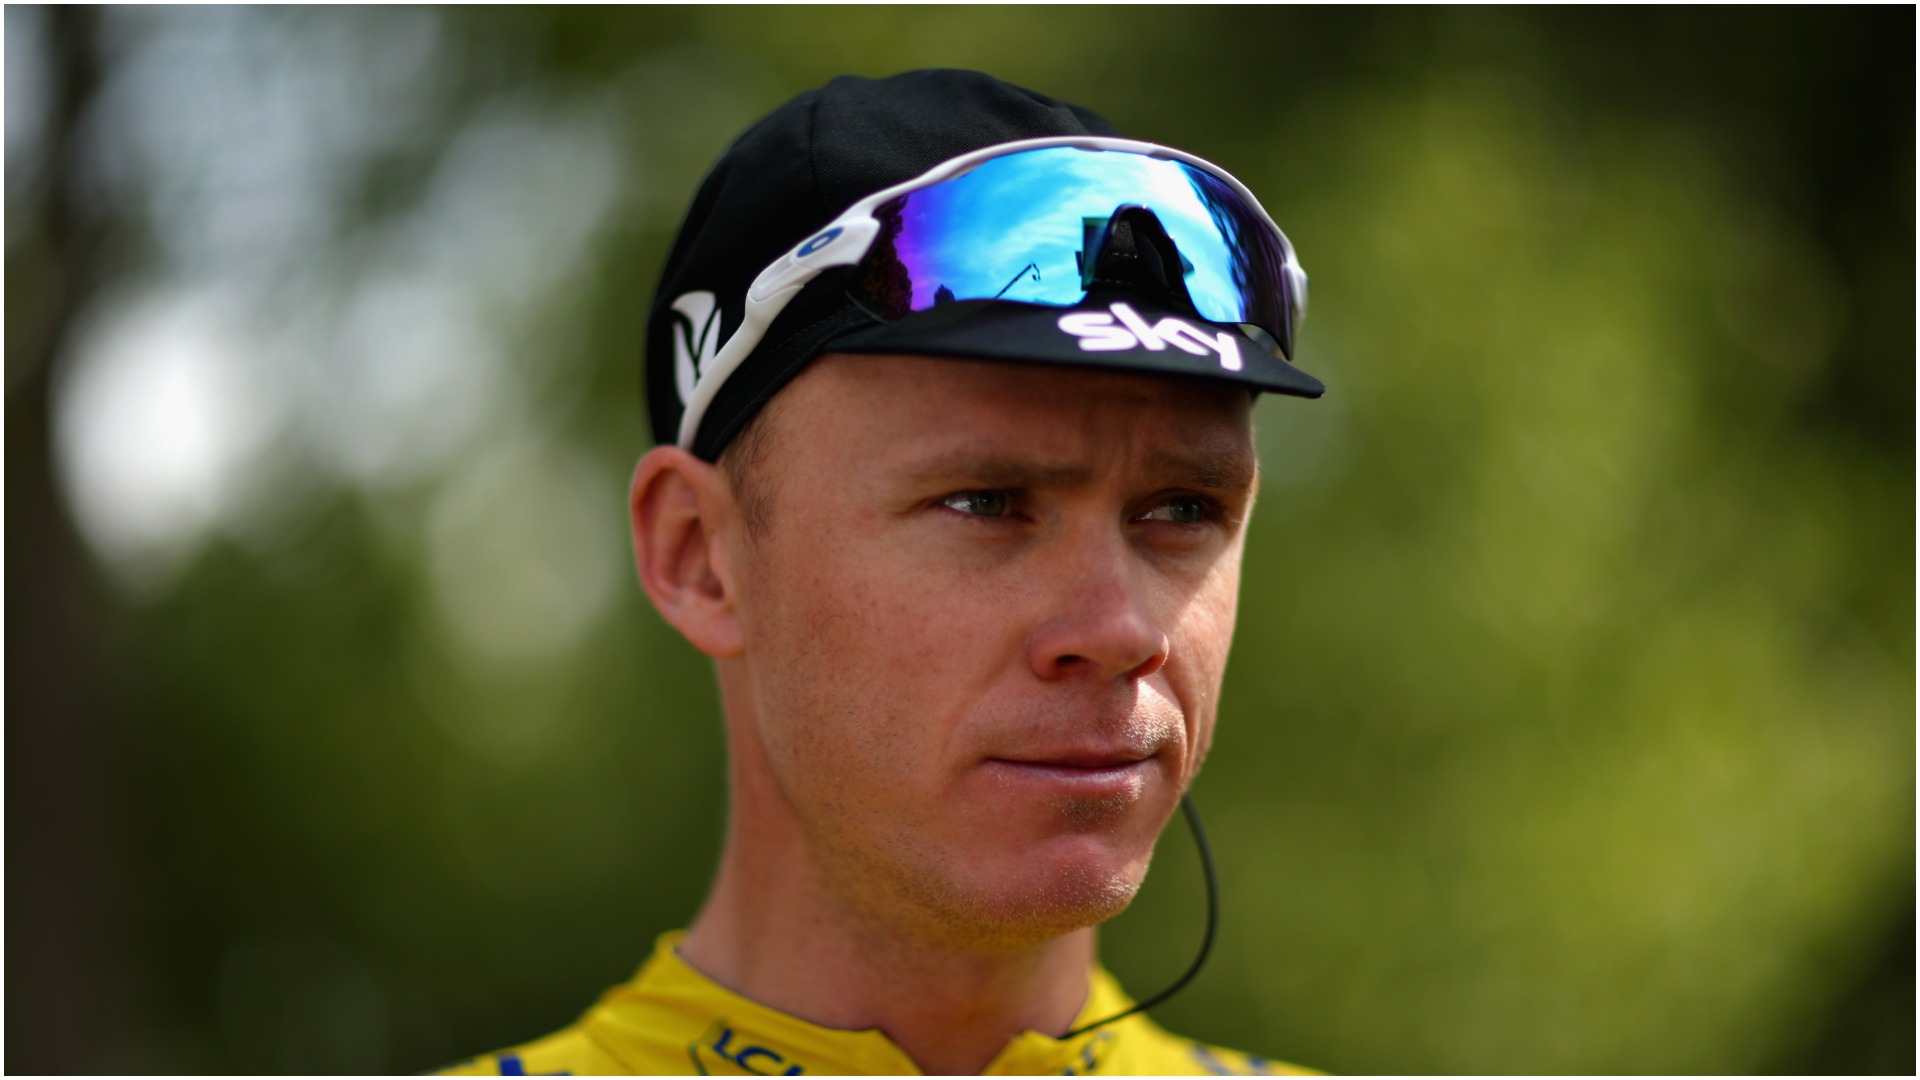 Bradley Wiggins would not be surprised if Chris Froome - who is riding again after a crash in June - wins the 2020 Tour de France.